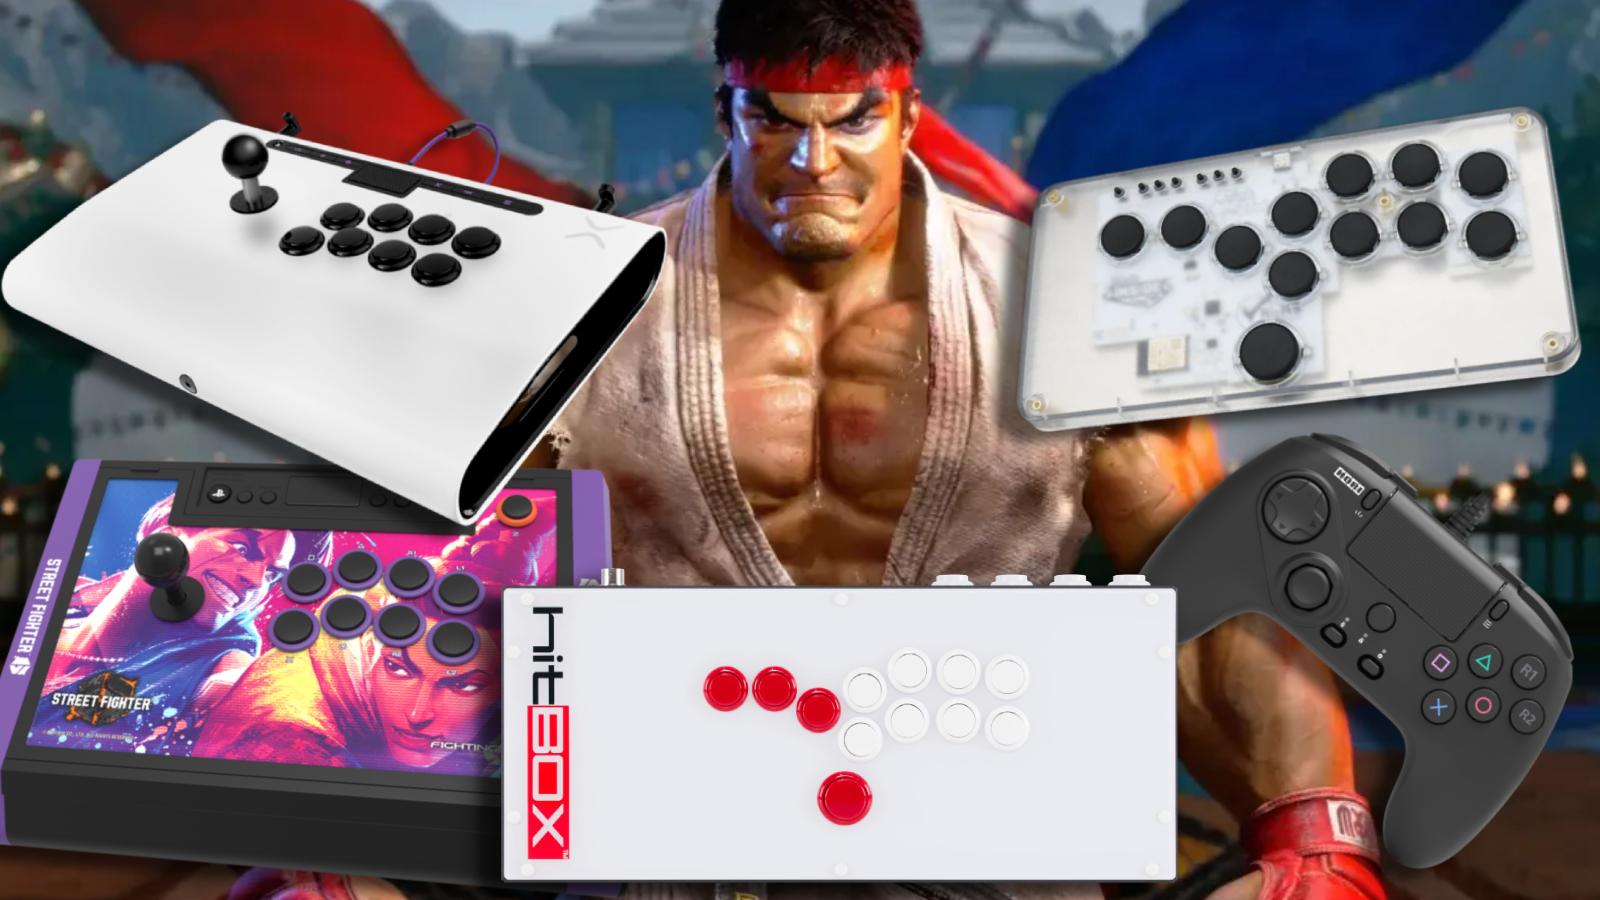 HORI PlayStation Fighting Stick Alpha (Street Fighter Edition) Tournament Grade Fightstick for PS5, PS4, PC Officially Licensed by Sony